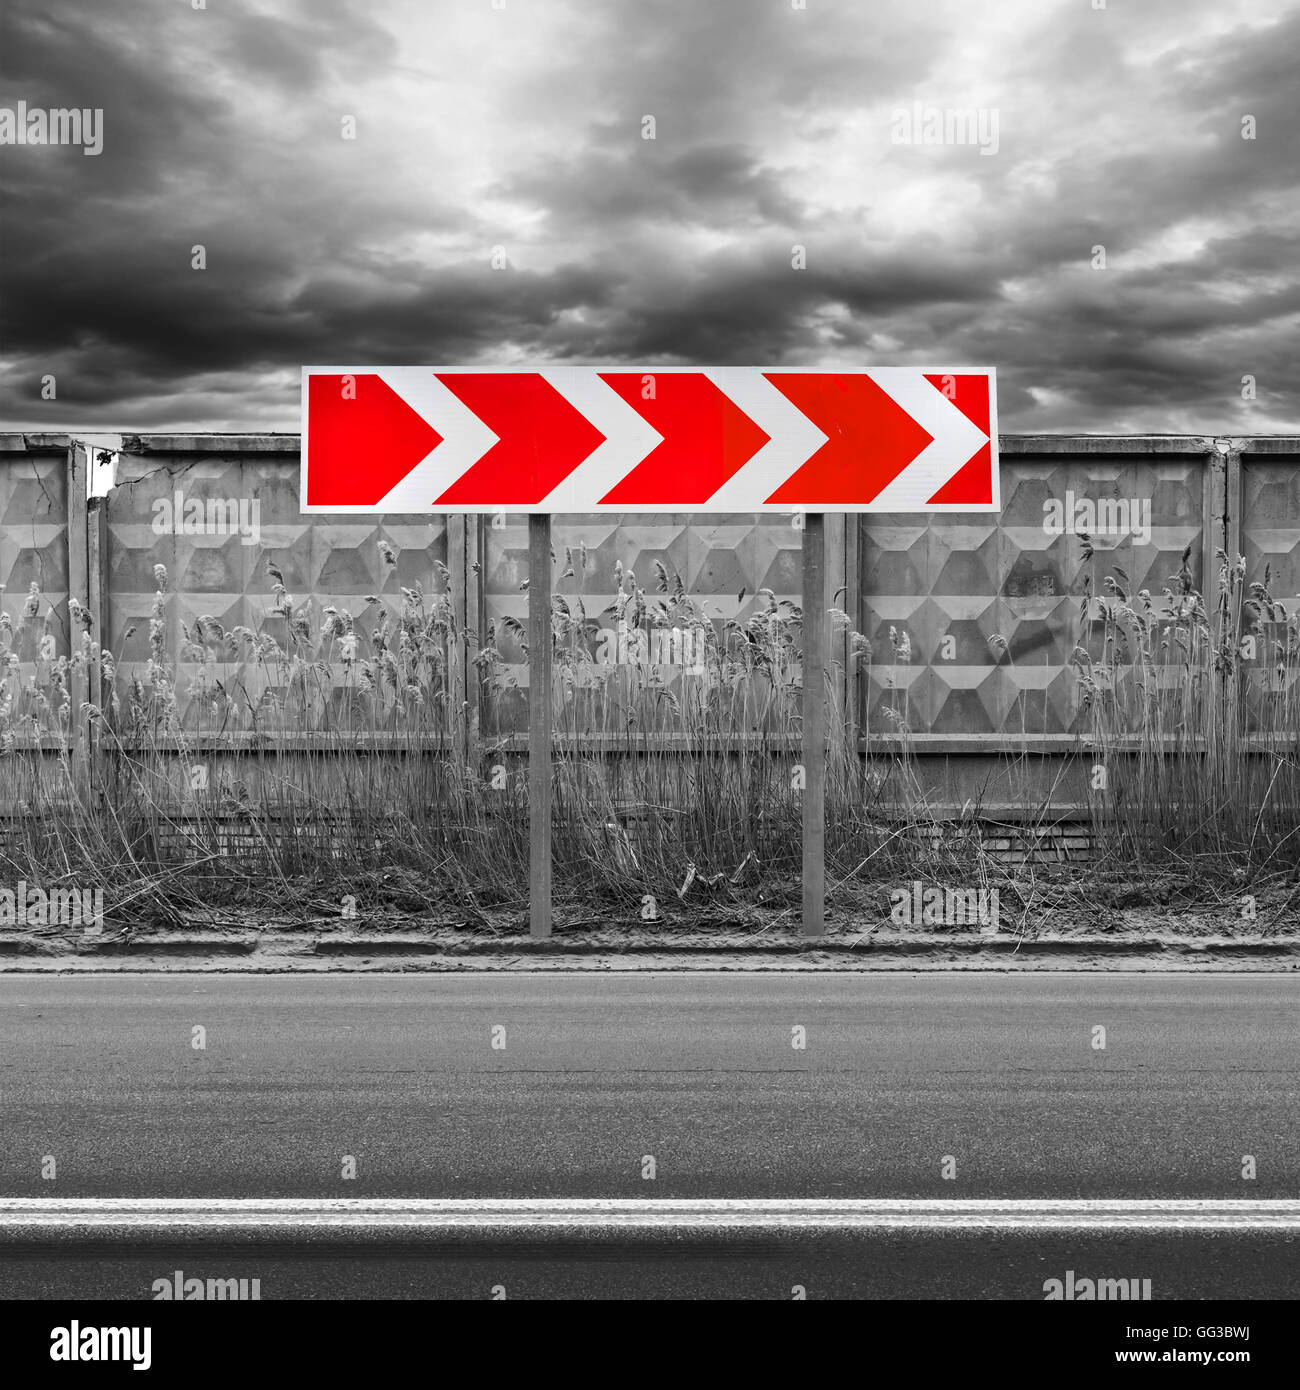 Red and white dangerous turn road sign stands near dark urban roadside with concrete fence Stock Photo